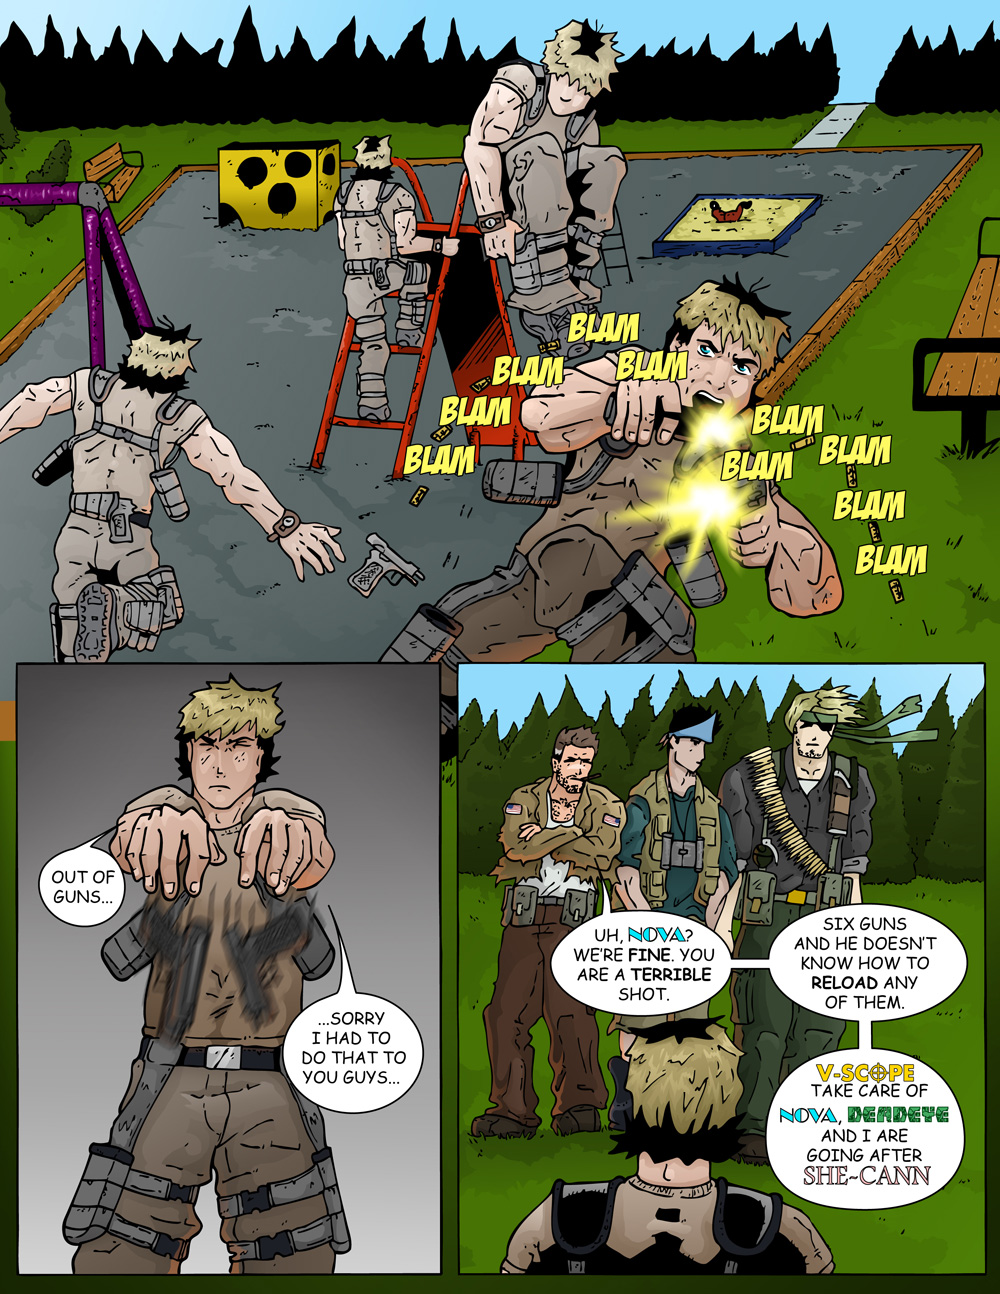 MISSION 002: PAGE 13 “OUT OF GUNS”